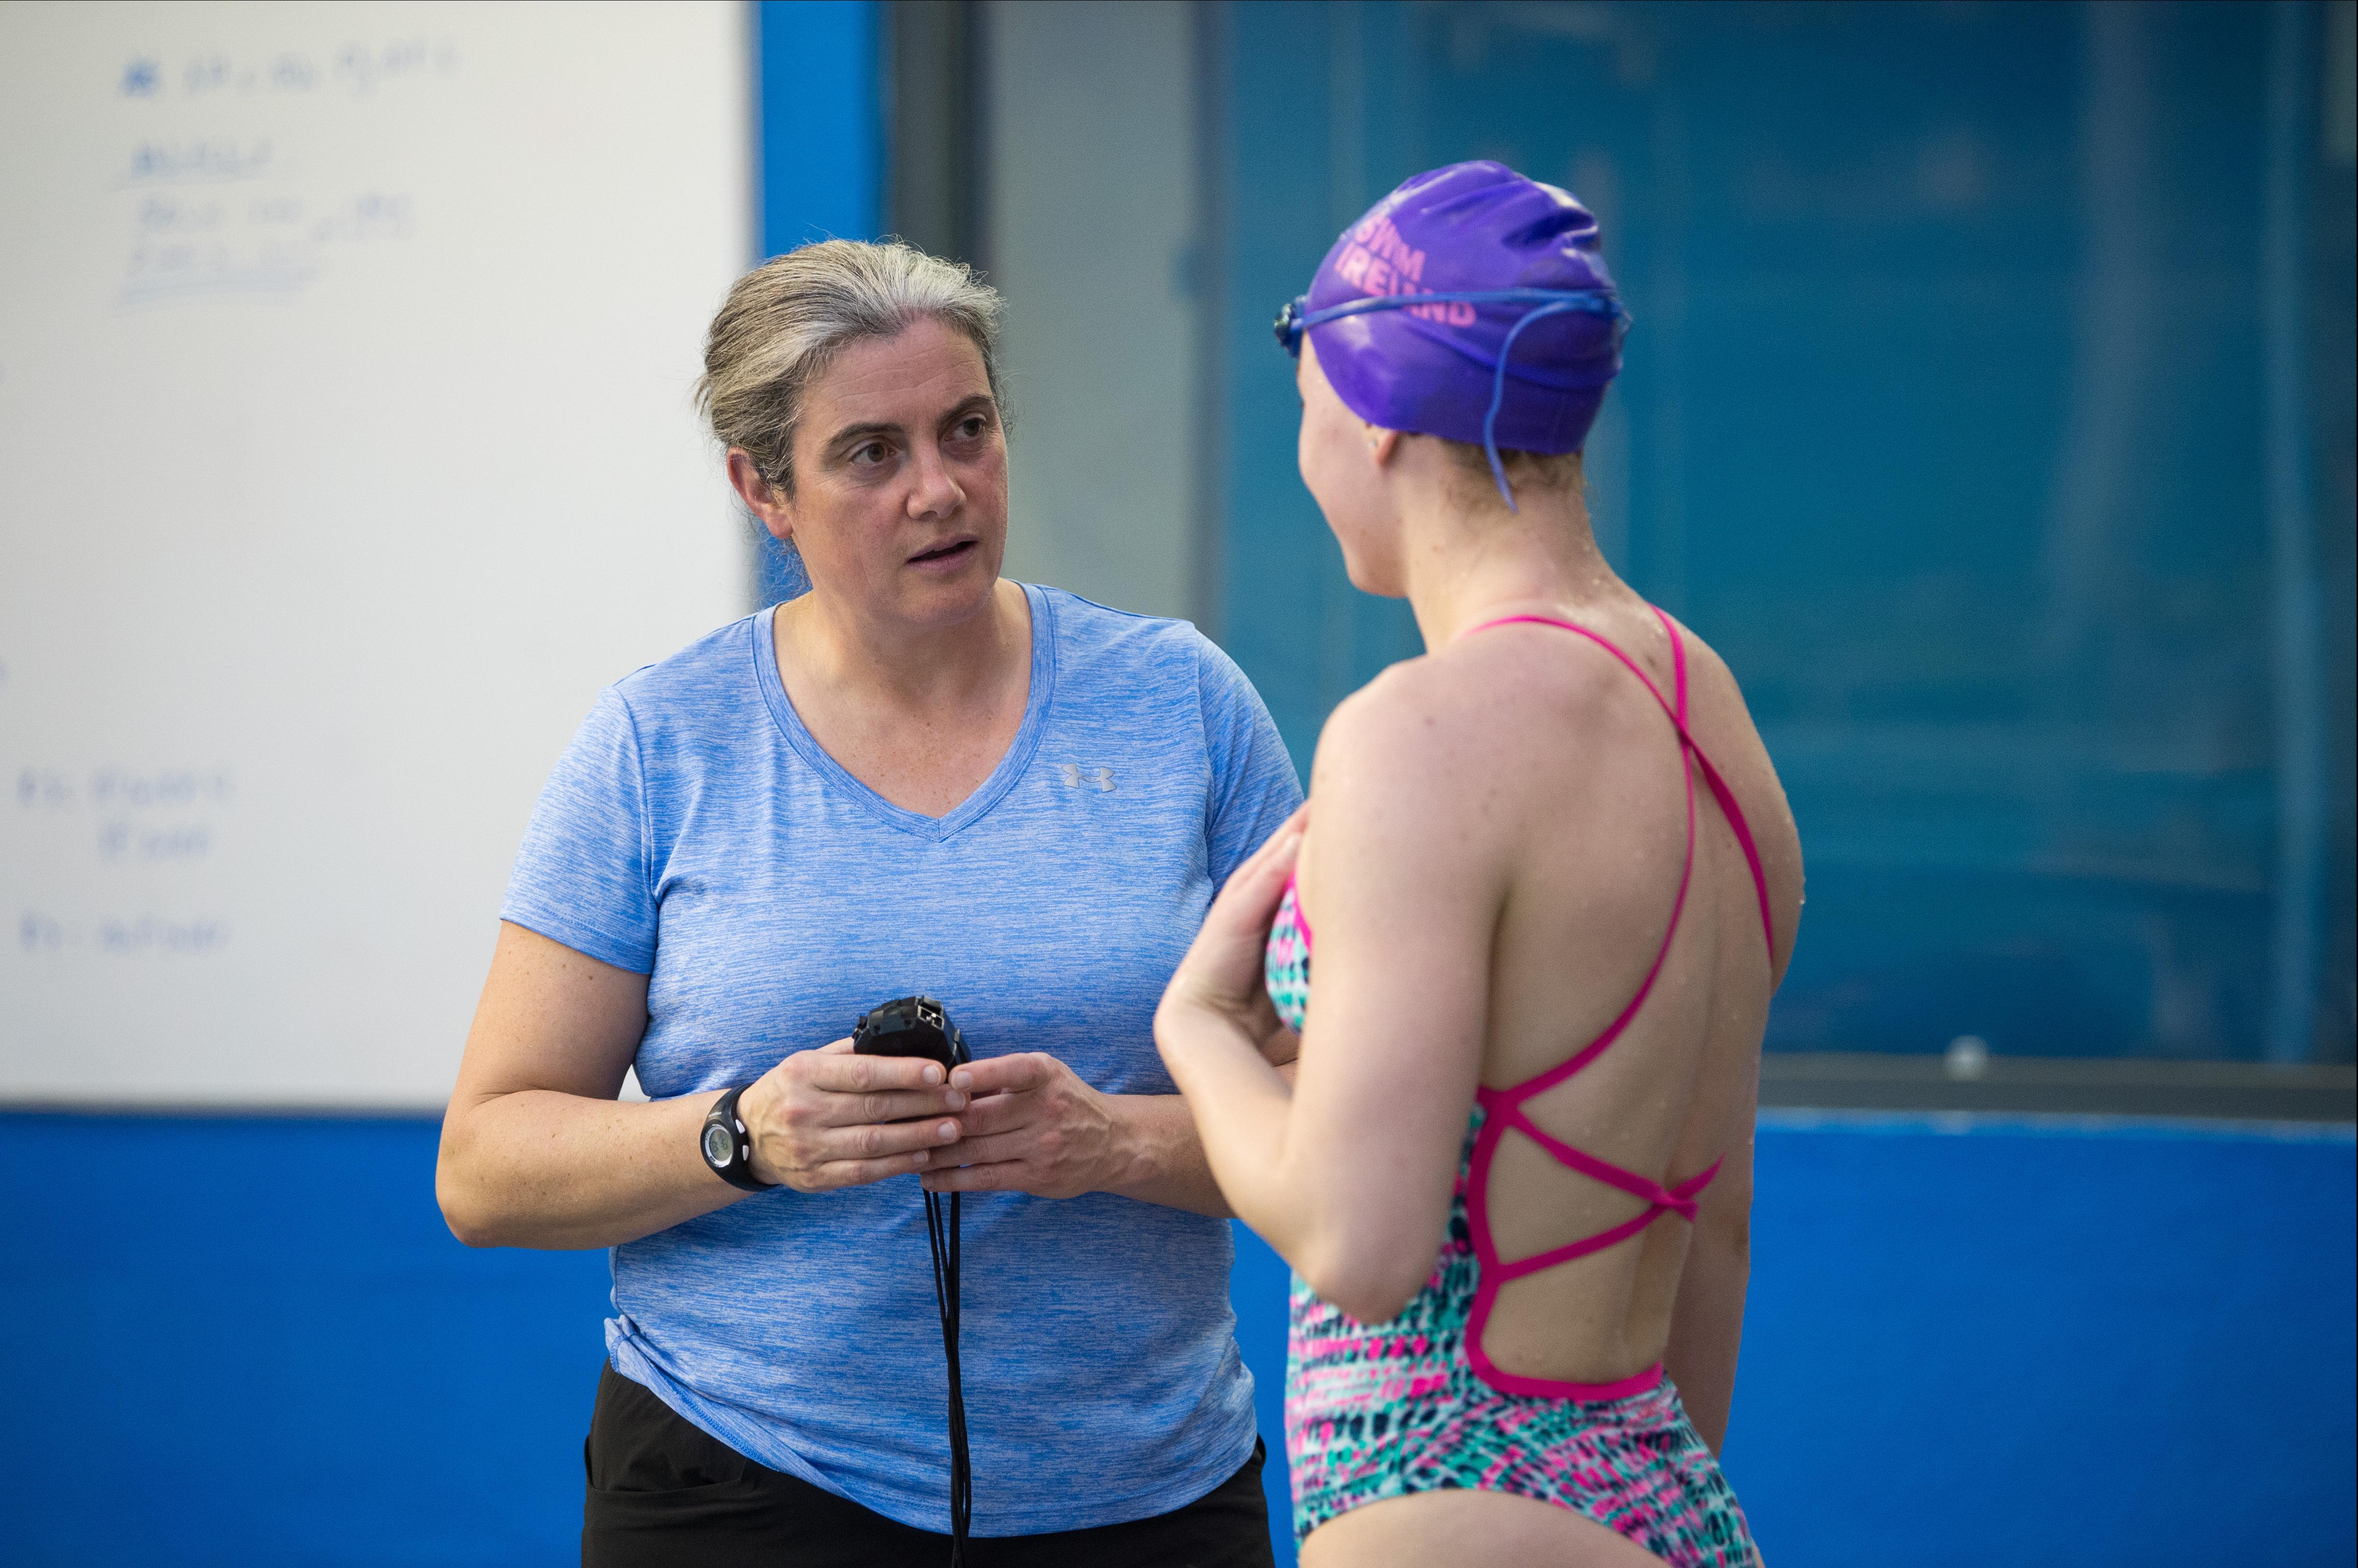 A swim coach chats to a female swimmer